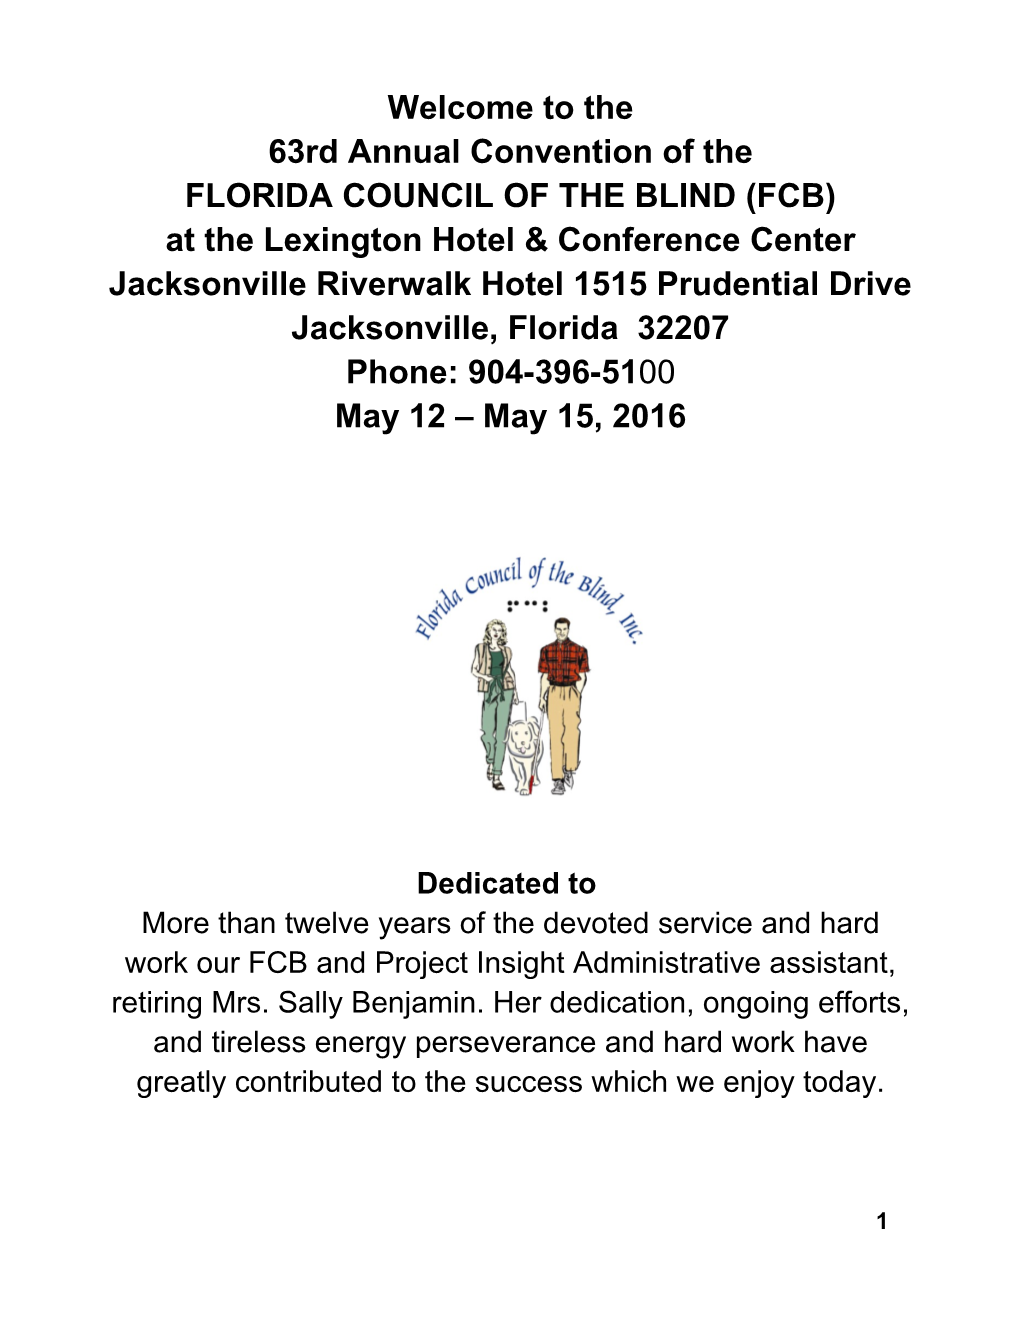 63Rd Annual Convention of the FLORIDACOUNCIL of the BLIND (FCB)